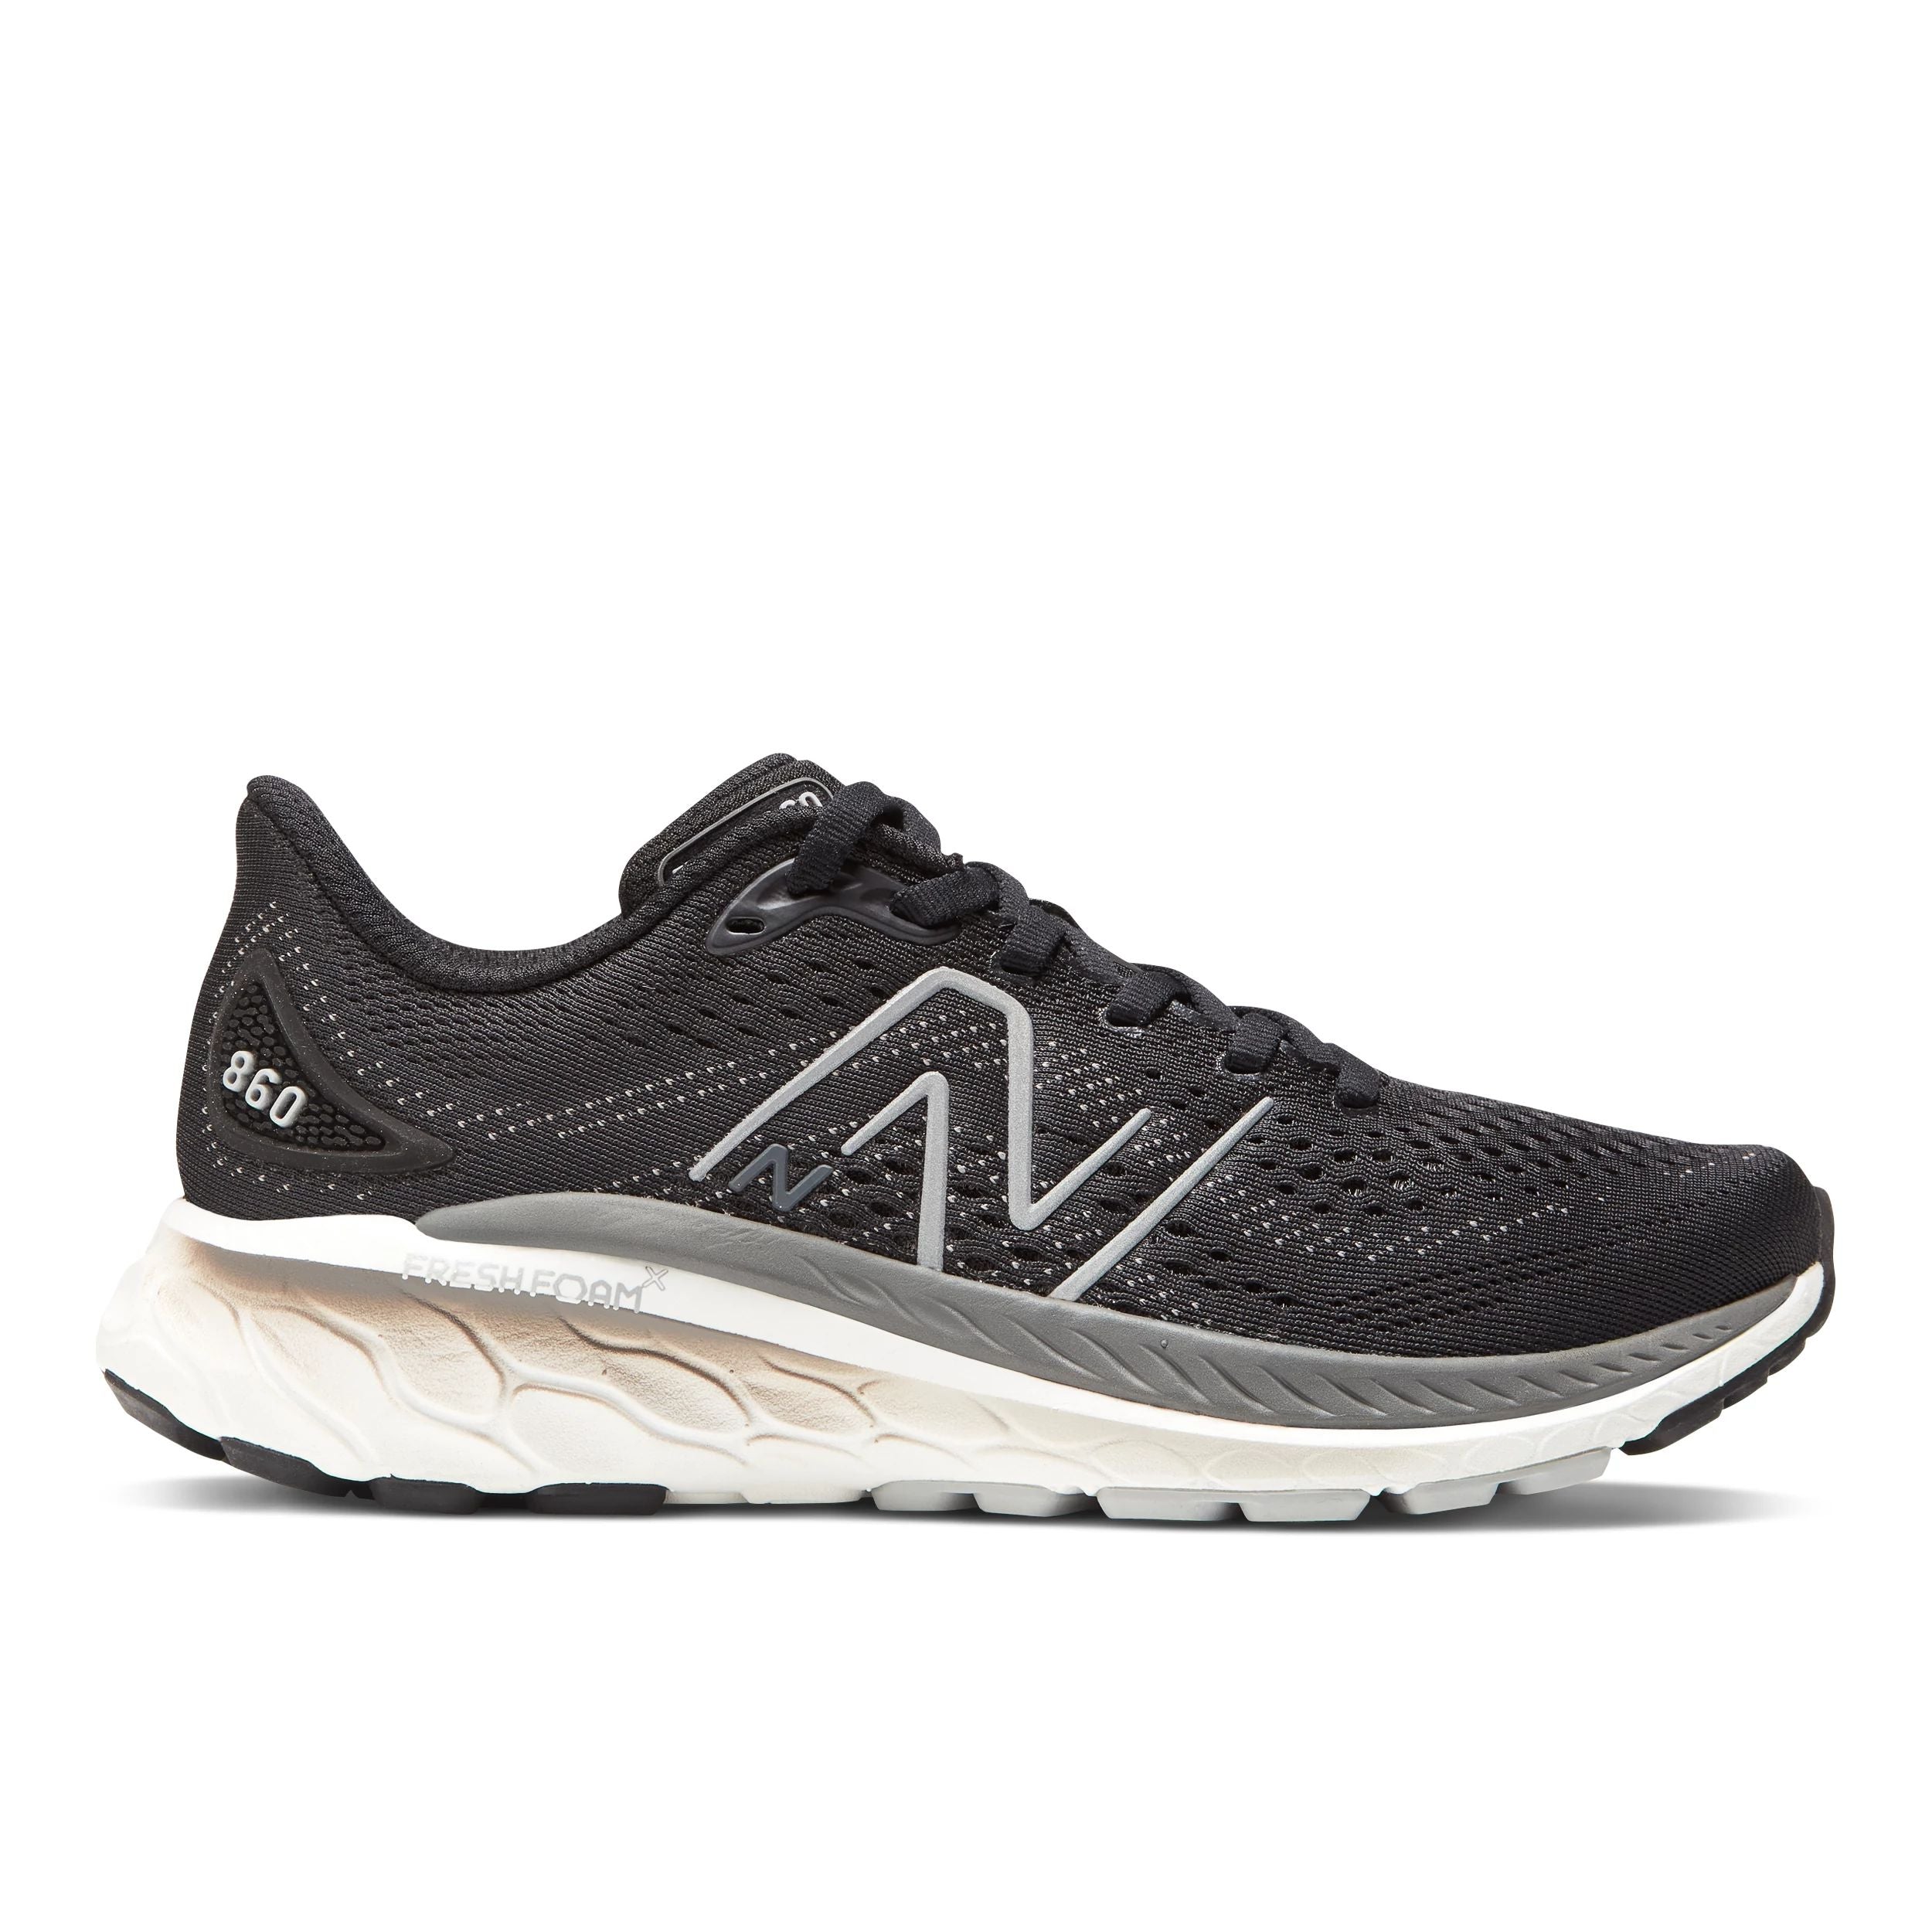 Lateral view of the Women's New Balance 860 V13 in the color Black/White